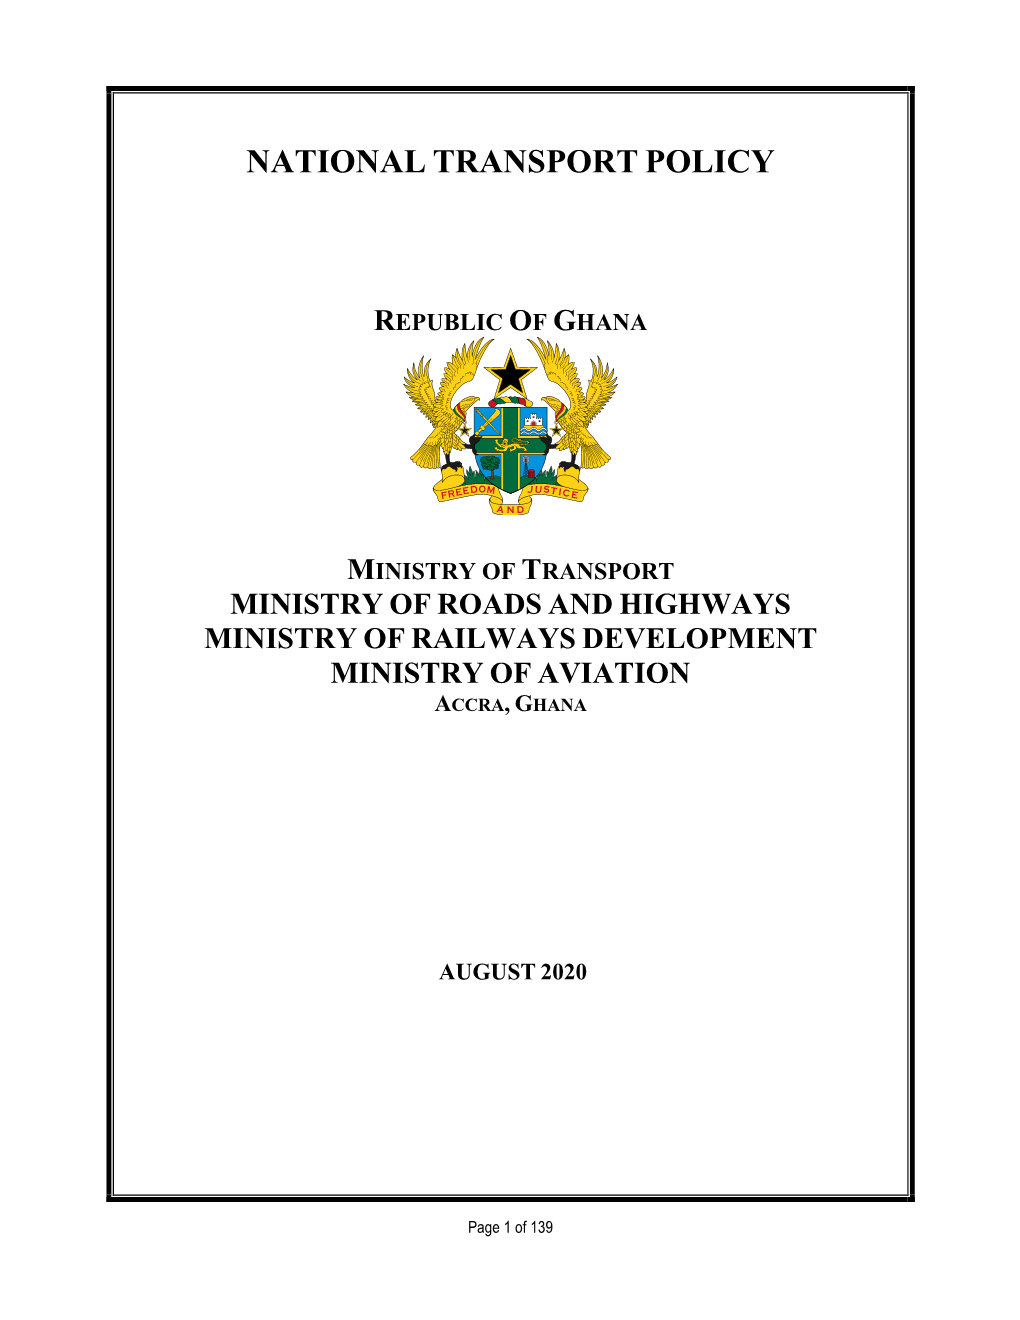 Final Approved Revised National Transport Policy